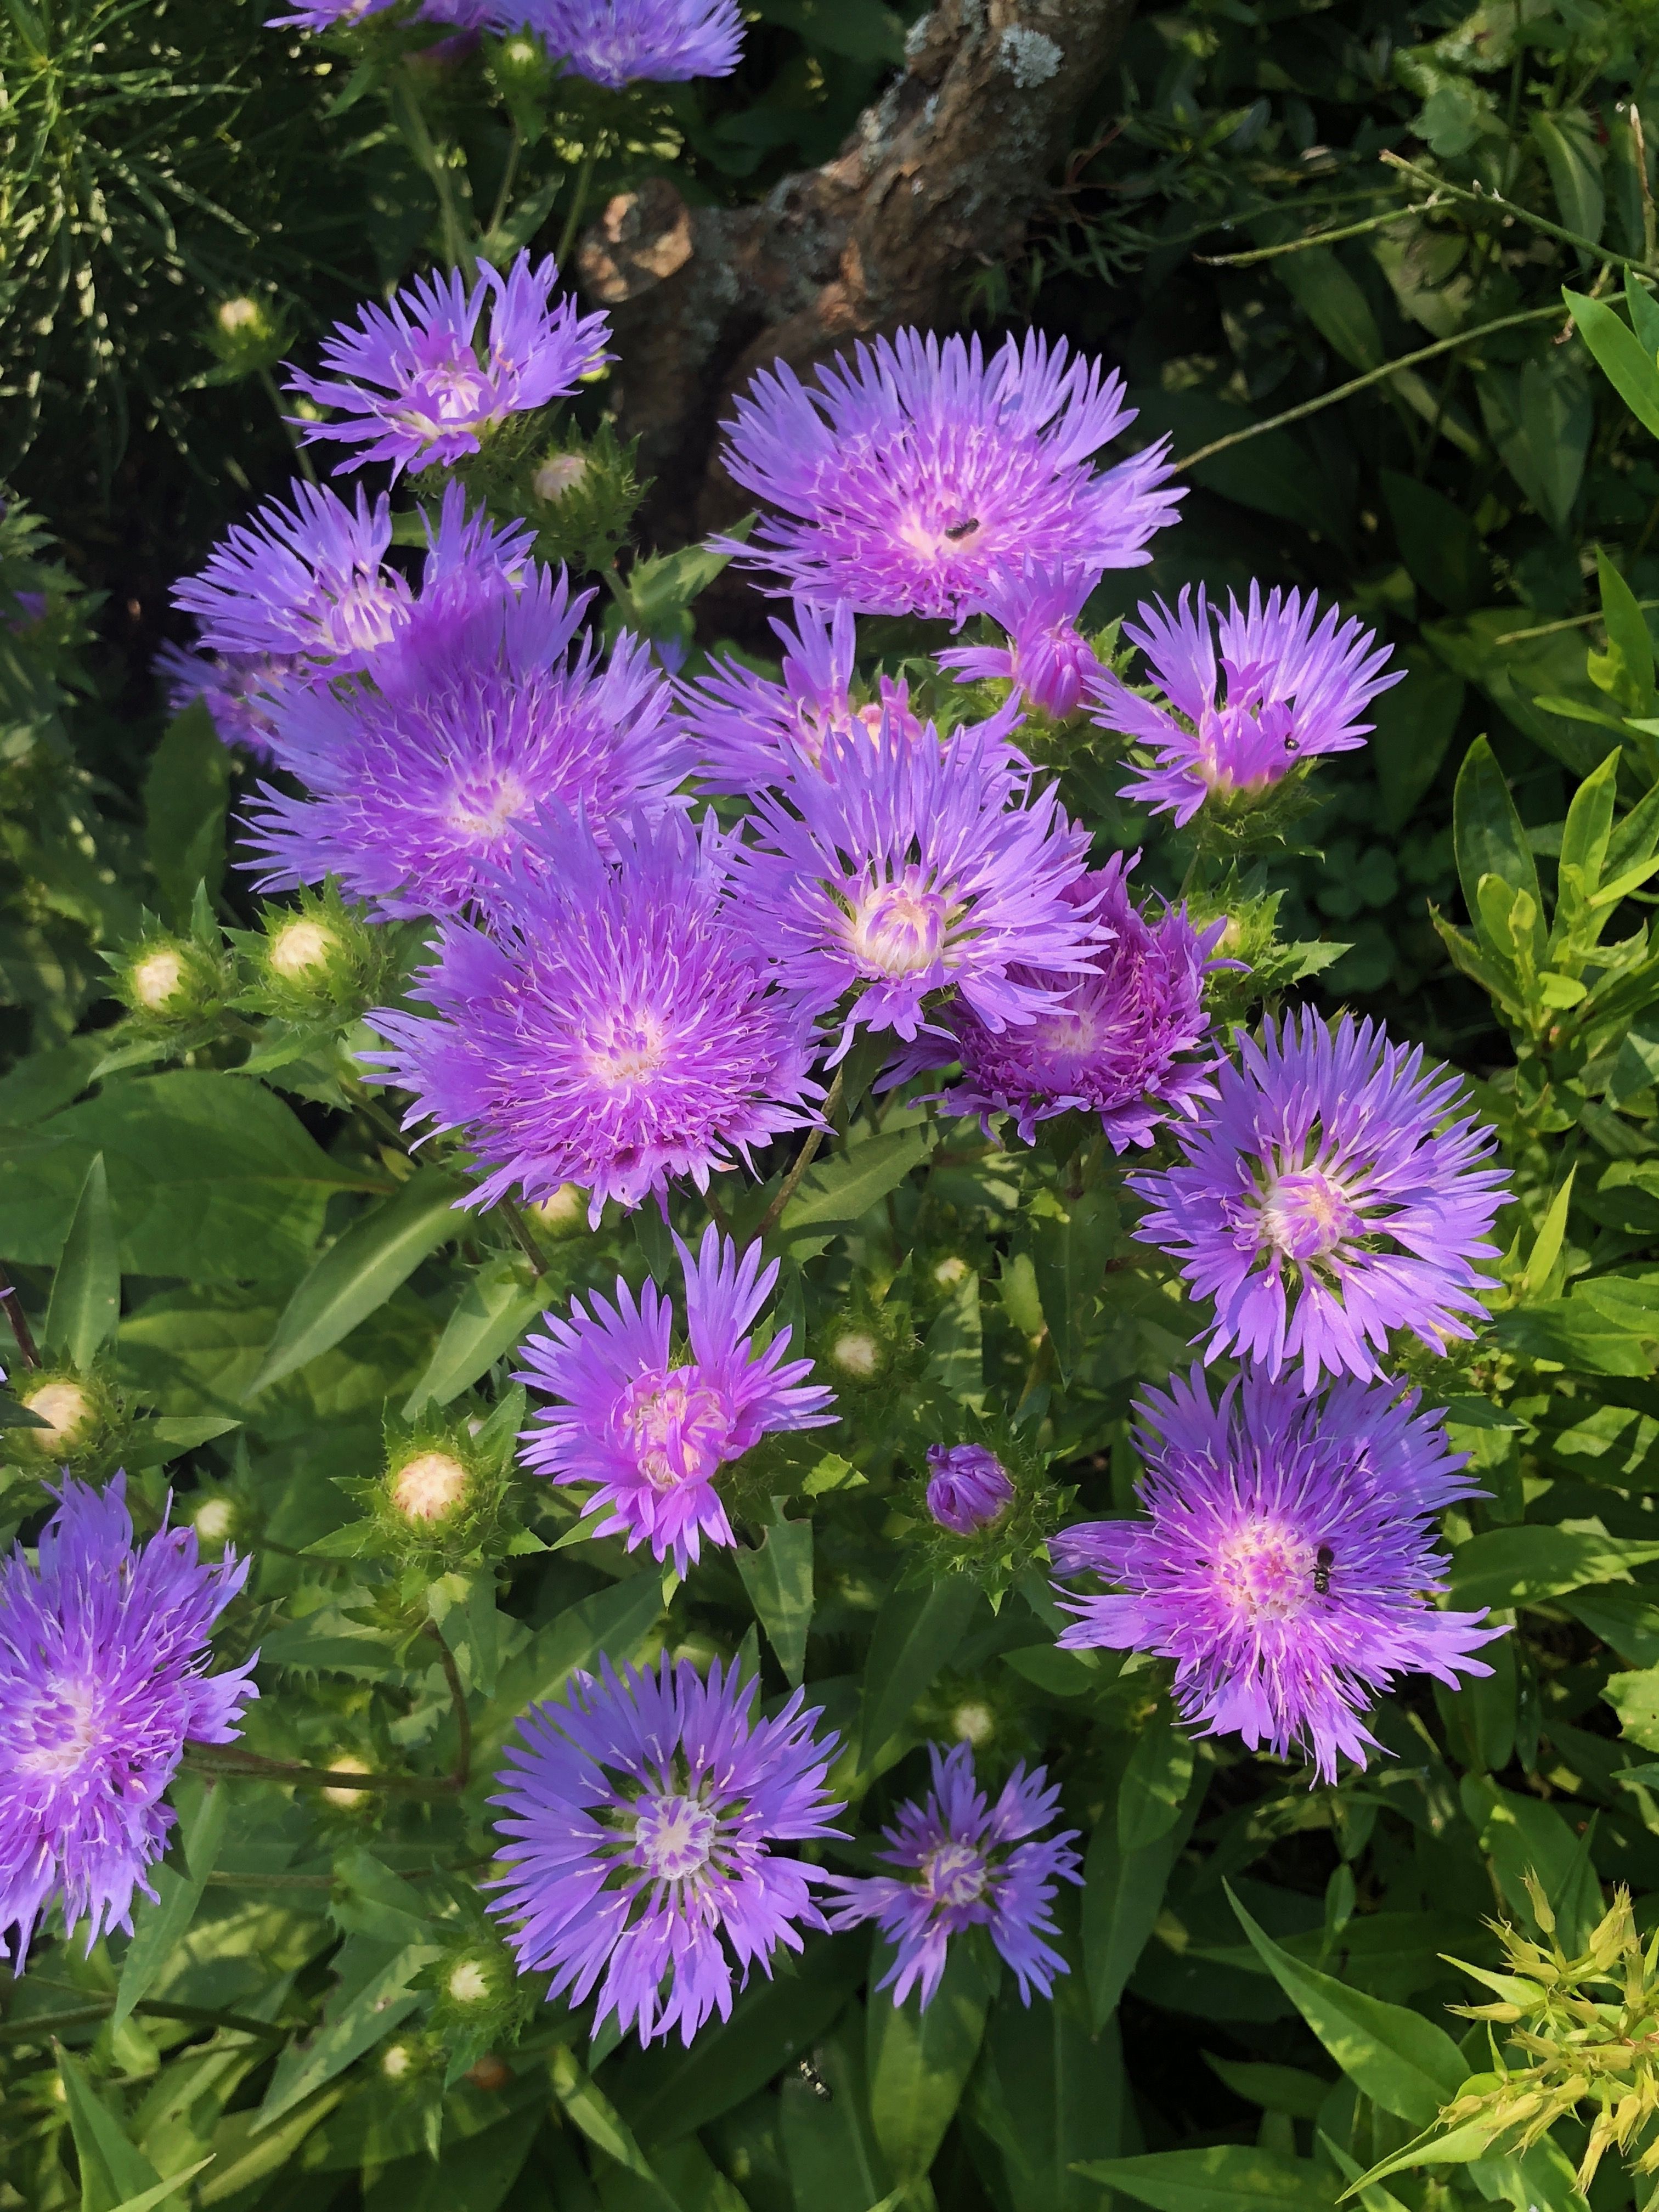 images/plants/stokesia/sto-mels-blue/sto-mels-blue-0004.jpg